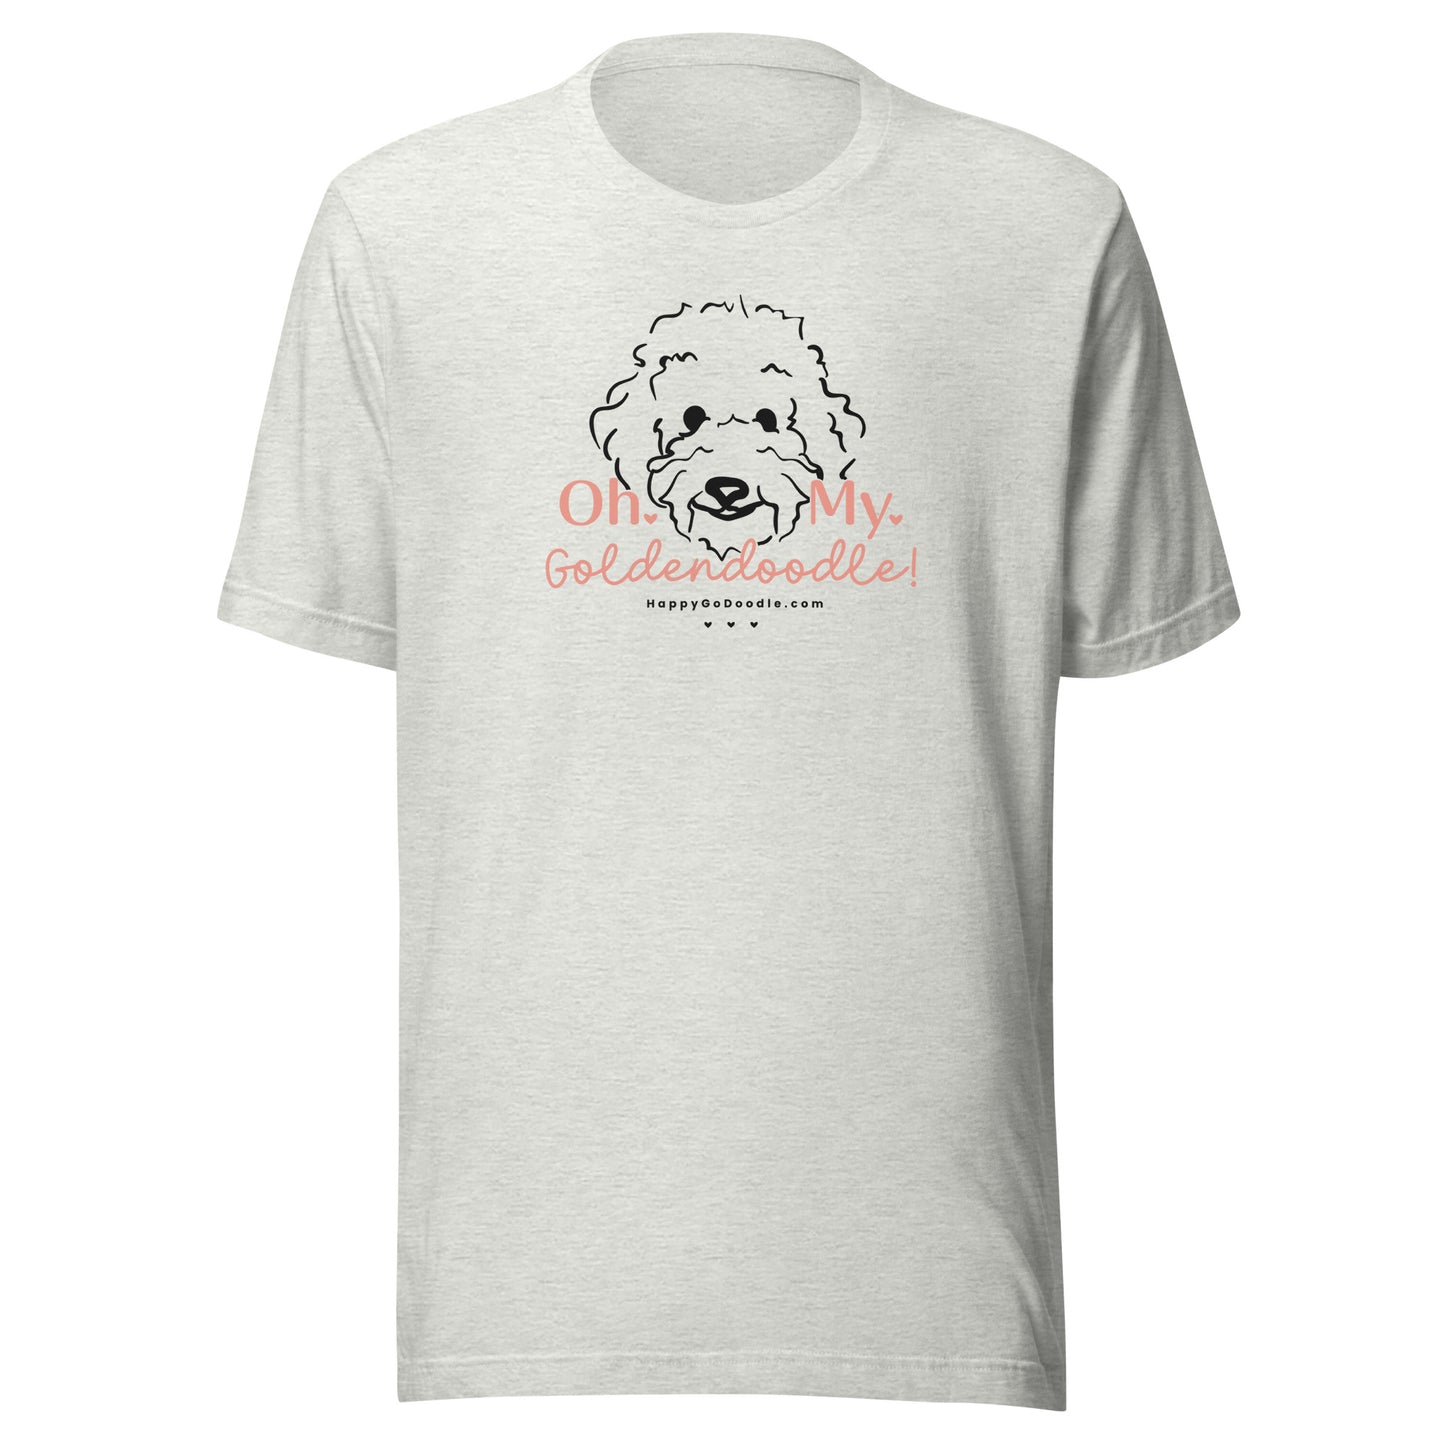 Goldendoodle t-shirt with Goldendoodle dog face and words "Oh My Goldendoodle" in ash color